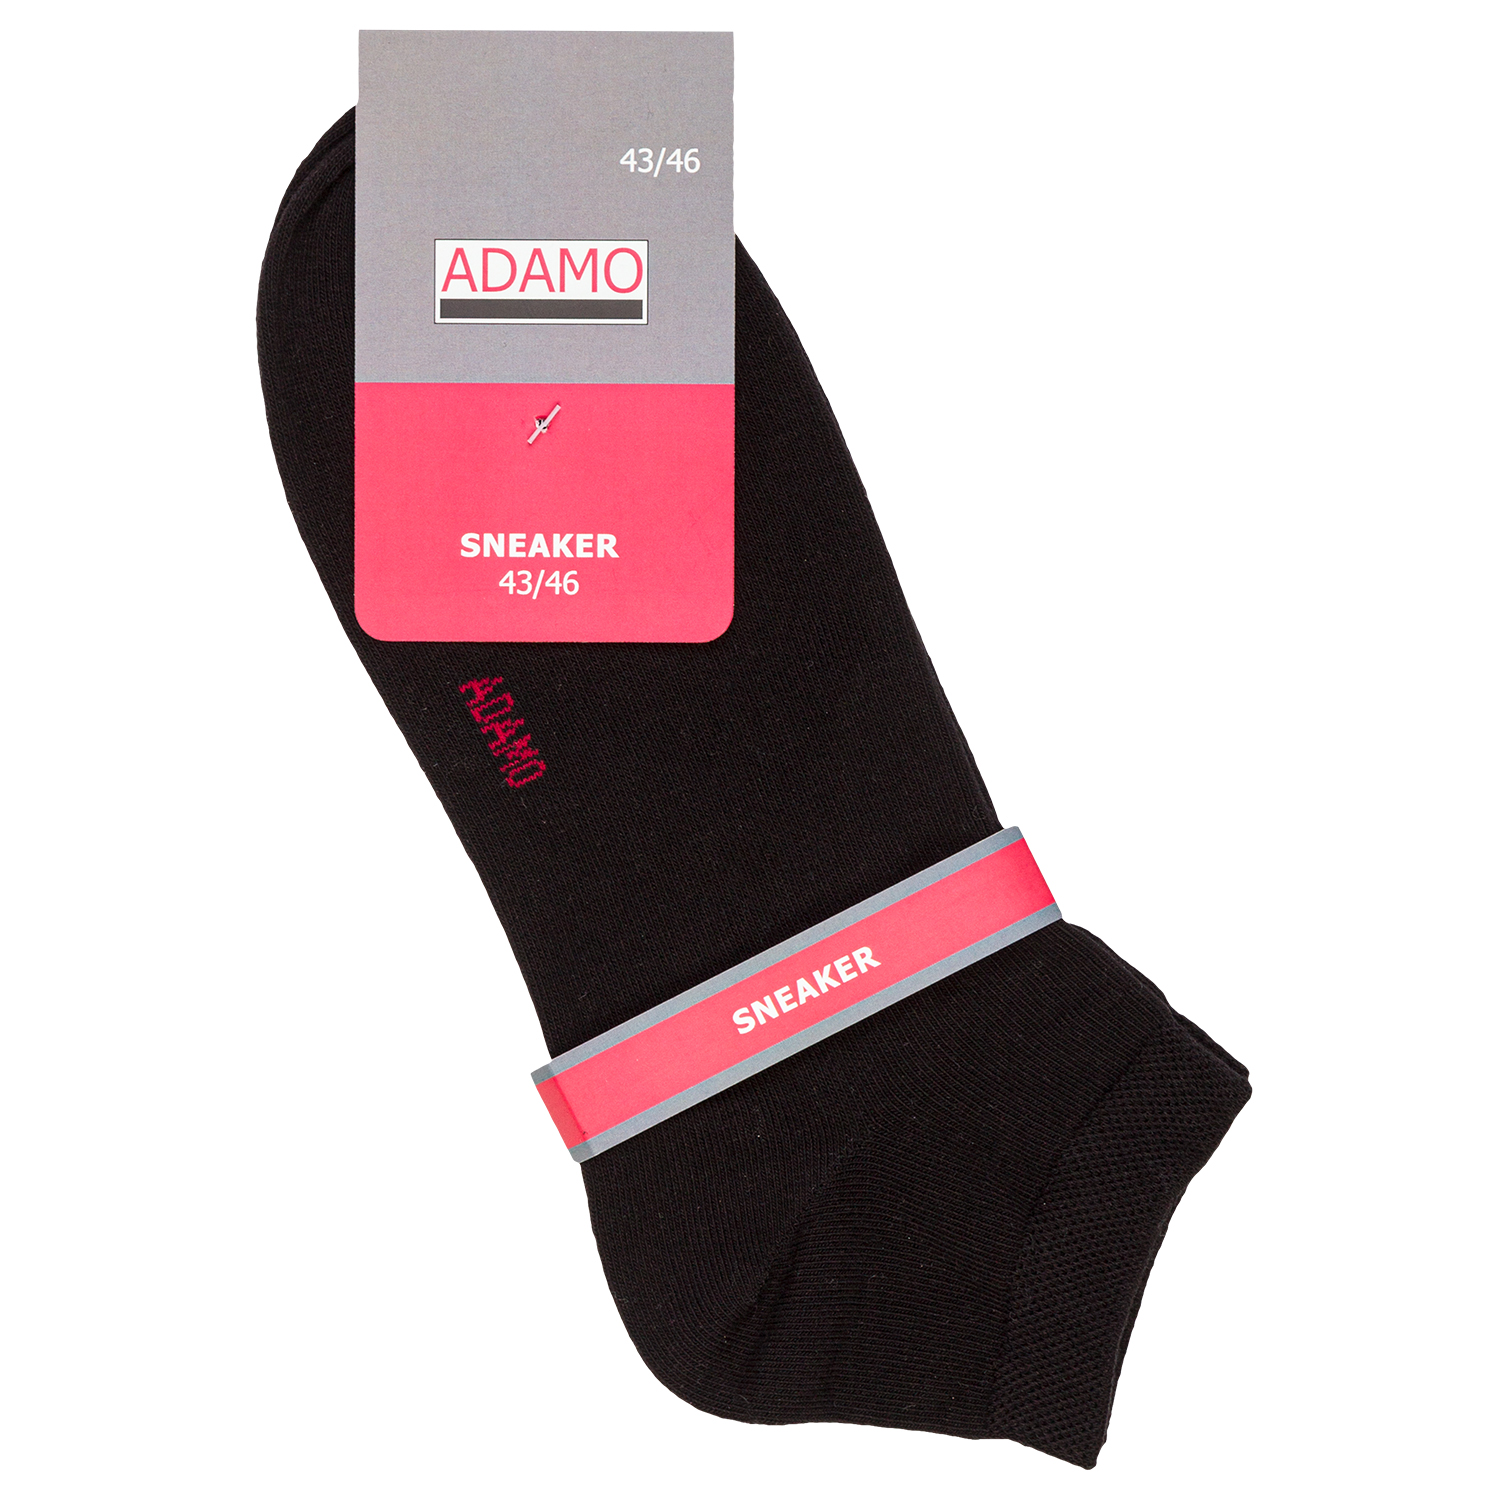 Men's sneaker sock in black pack of four up to size 51/54